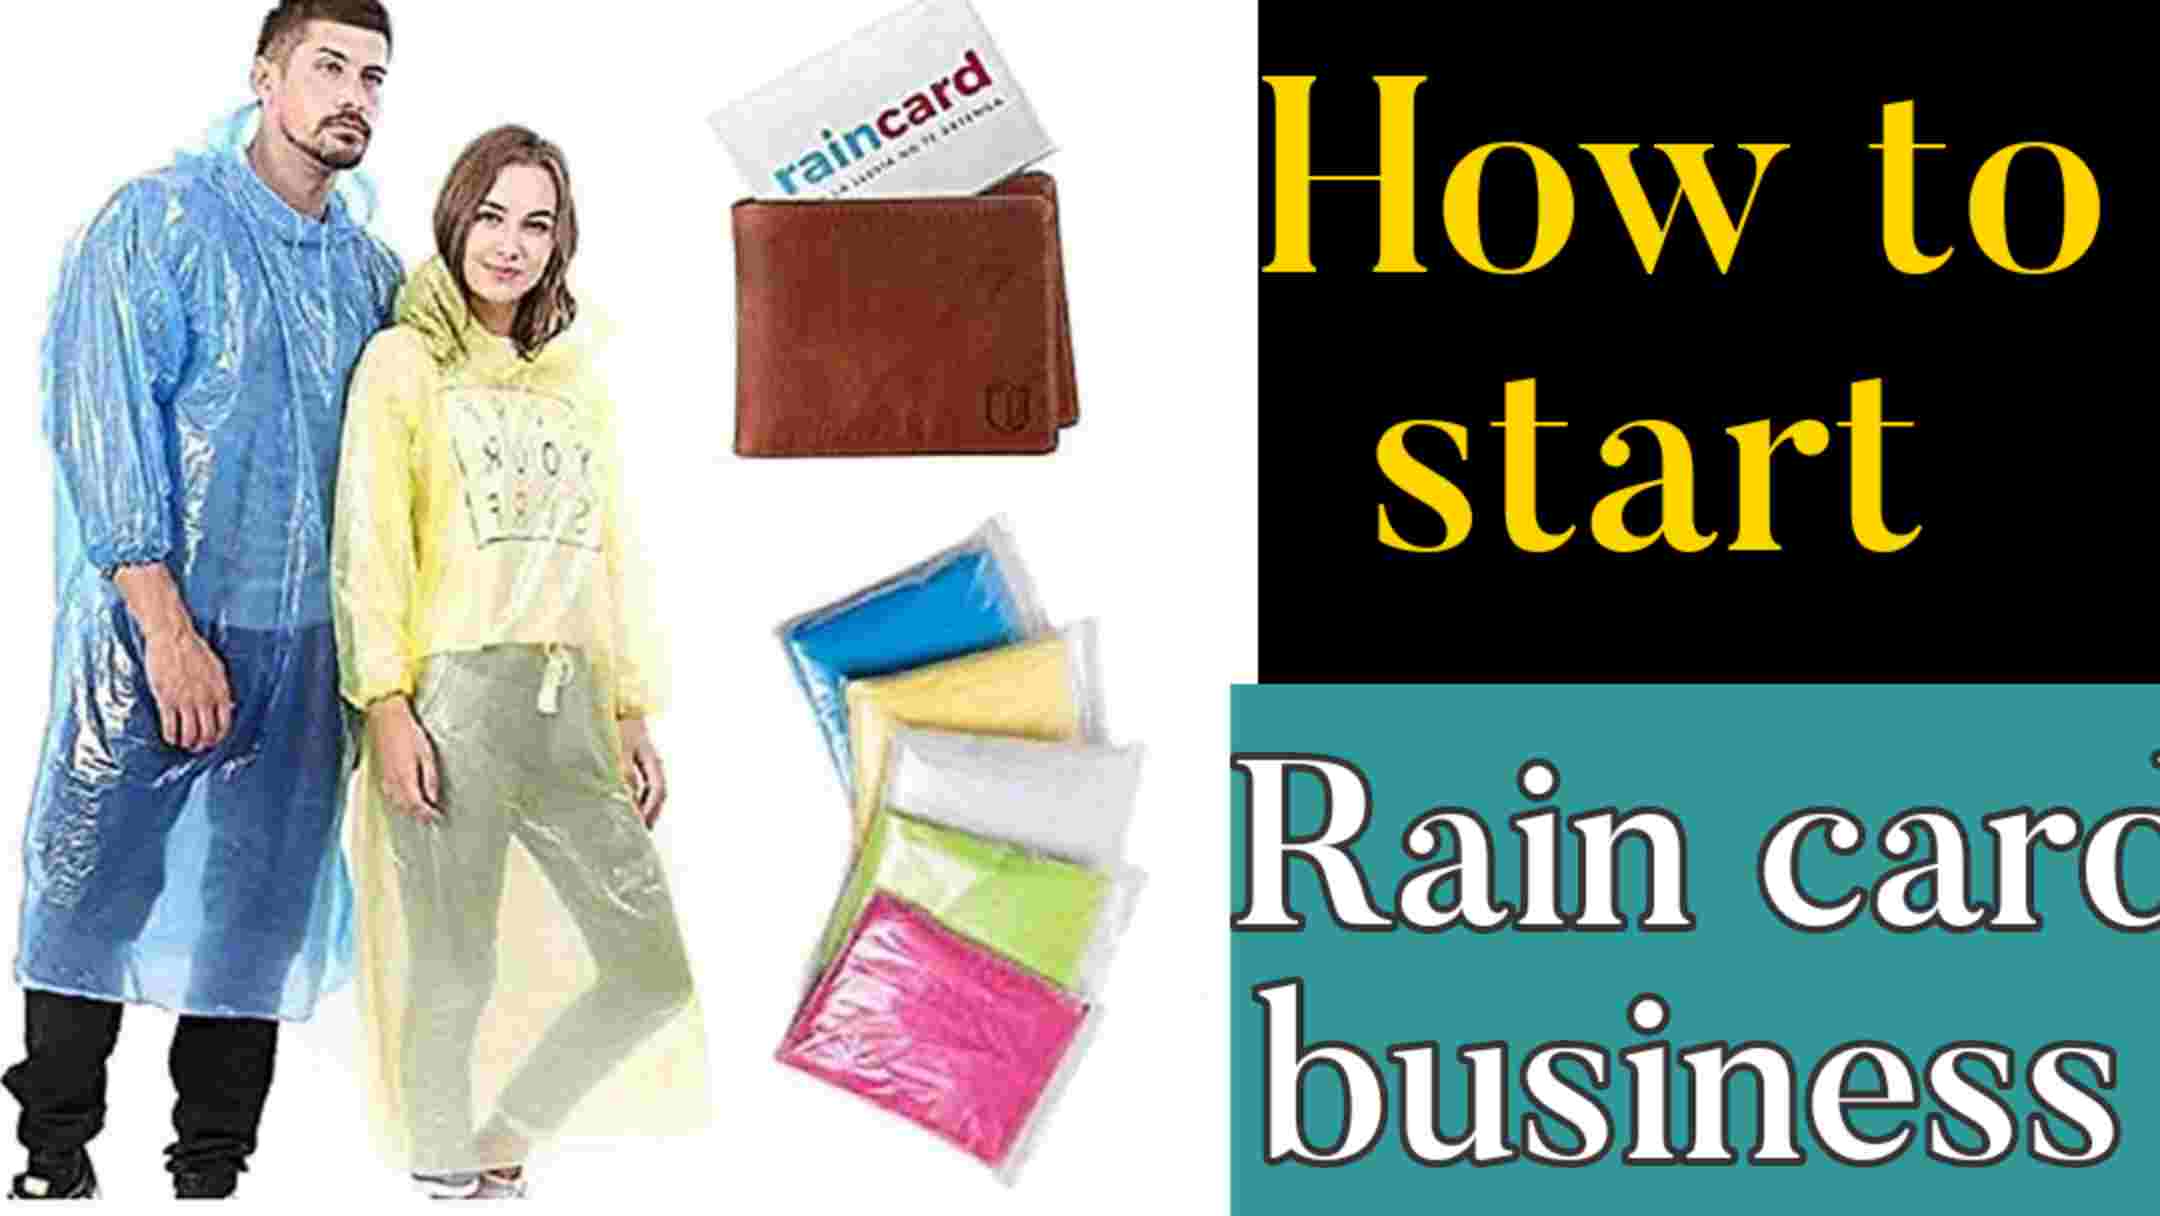 Rain Card Business  Buy ₹ 13 Sell for ₹ 99 start like this/